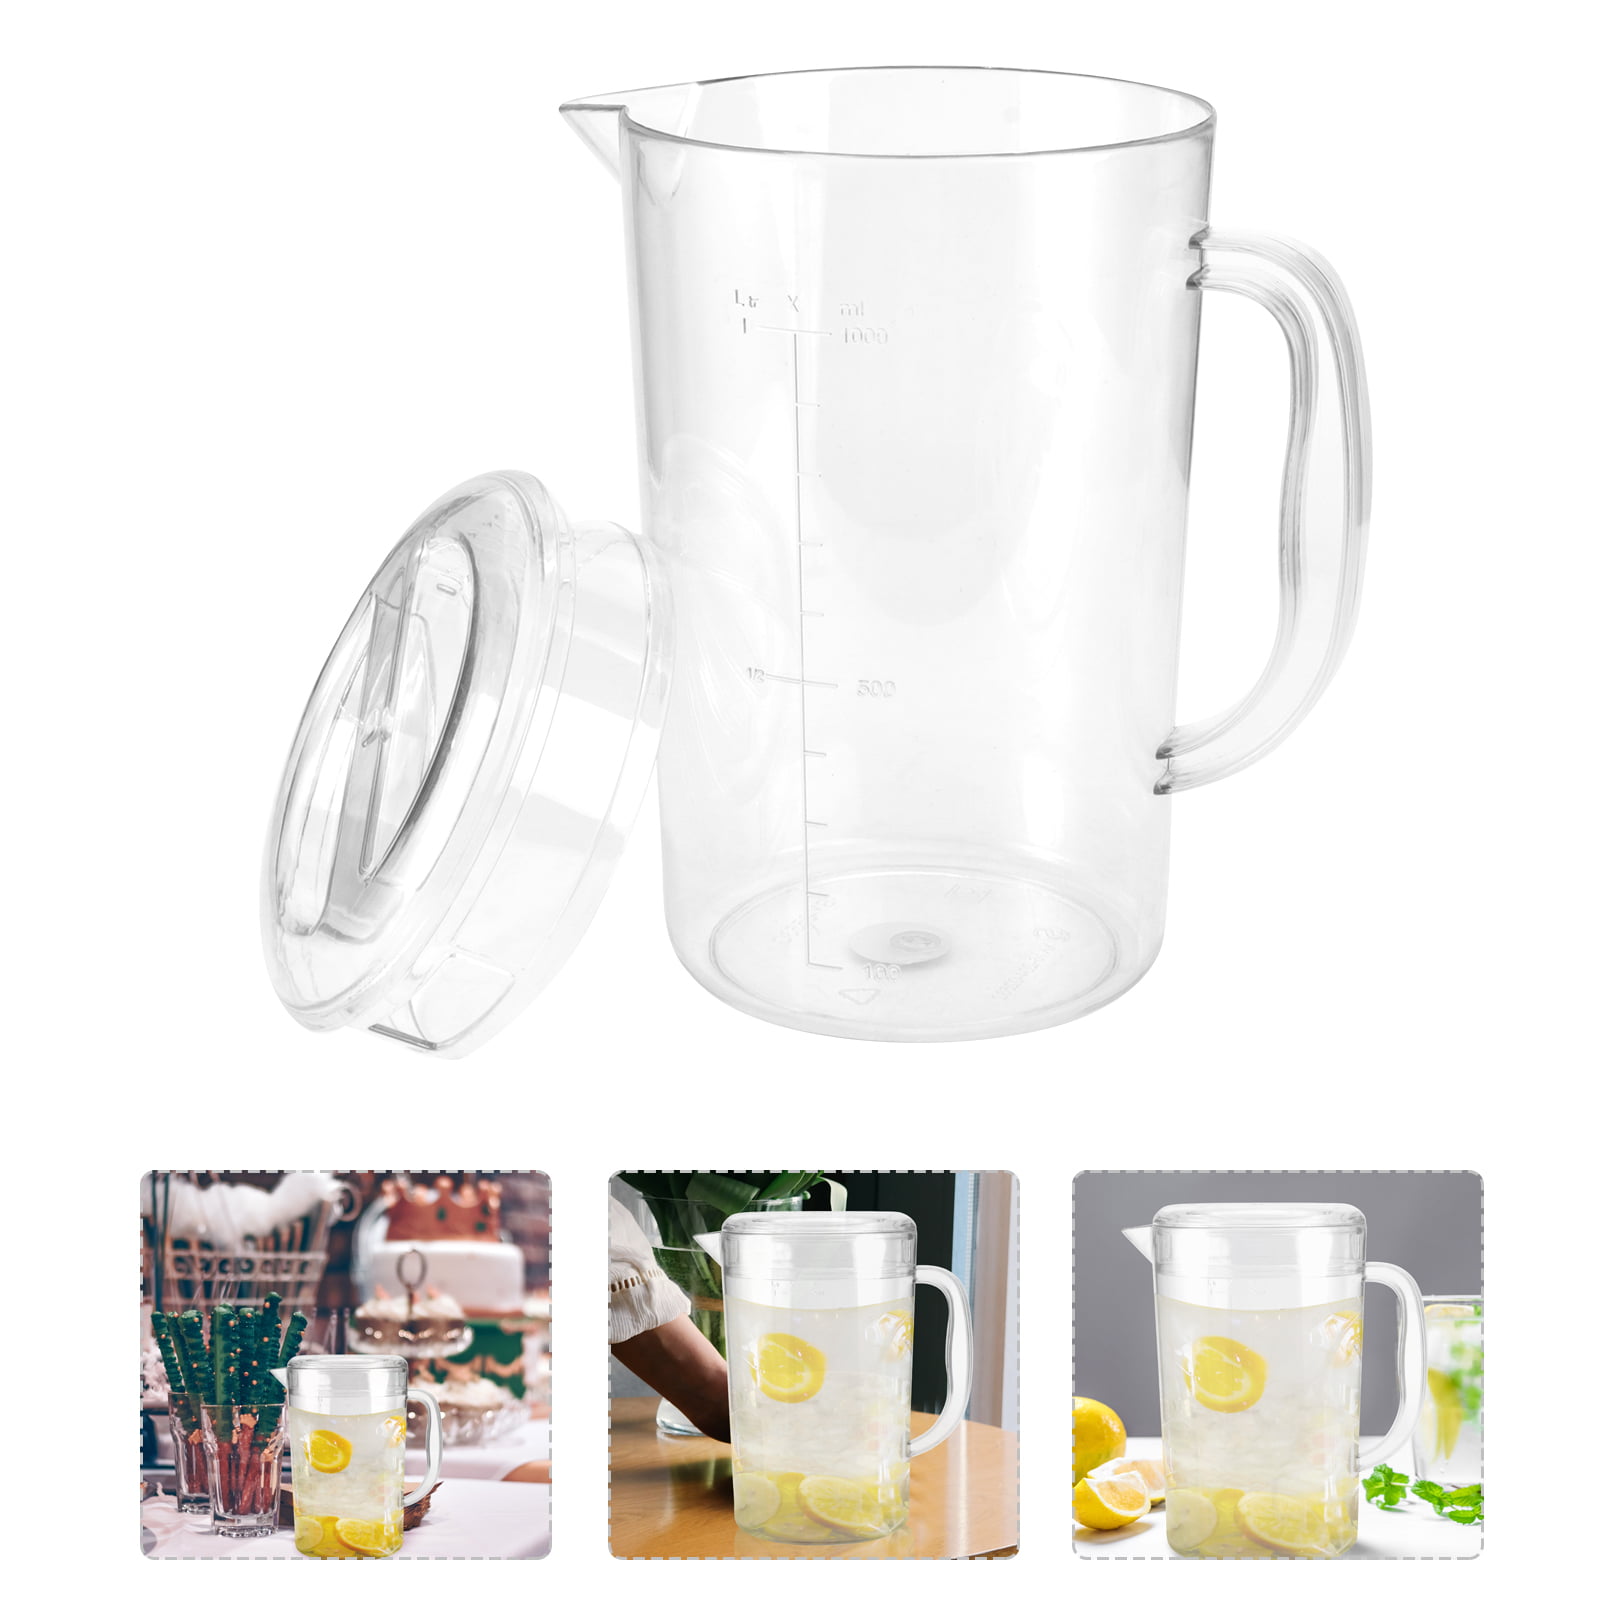 EXQUIMEUBLE Stainless Steel Pitcher Milk Water Bottle Drinkware Set Tea  Pitcher 1 Gallon for Fridge Glass Carafes Plastic Pitcher with Lid Pitchers